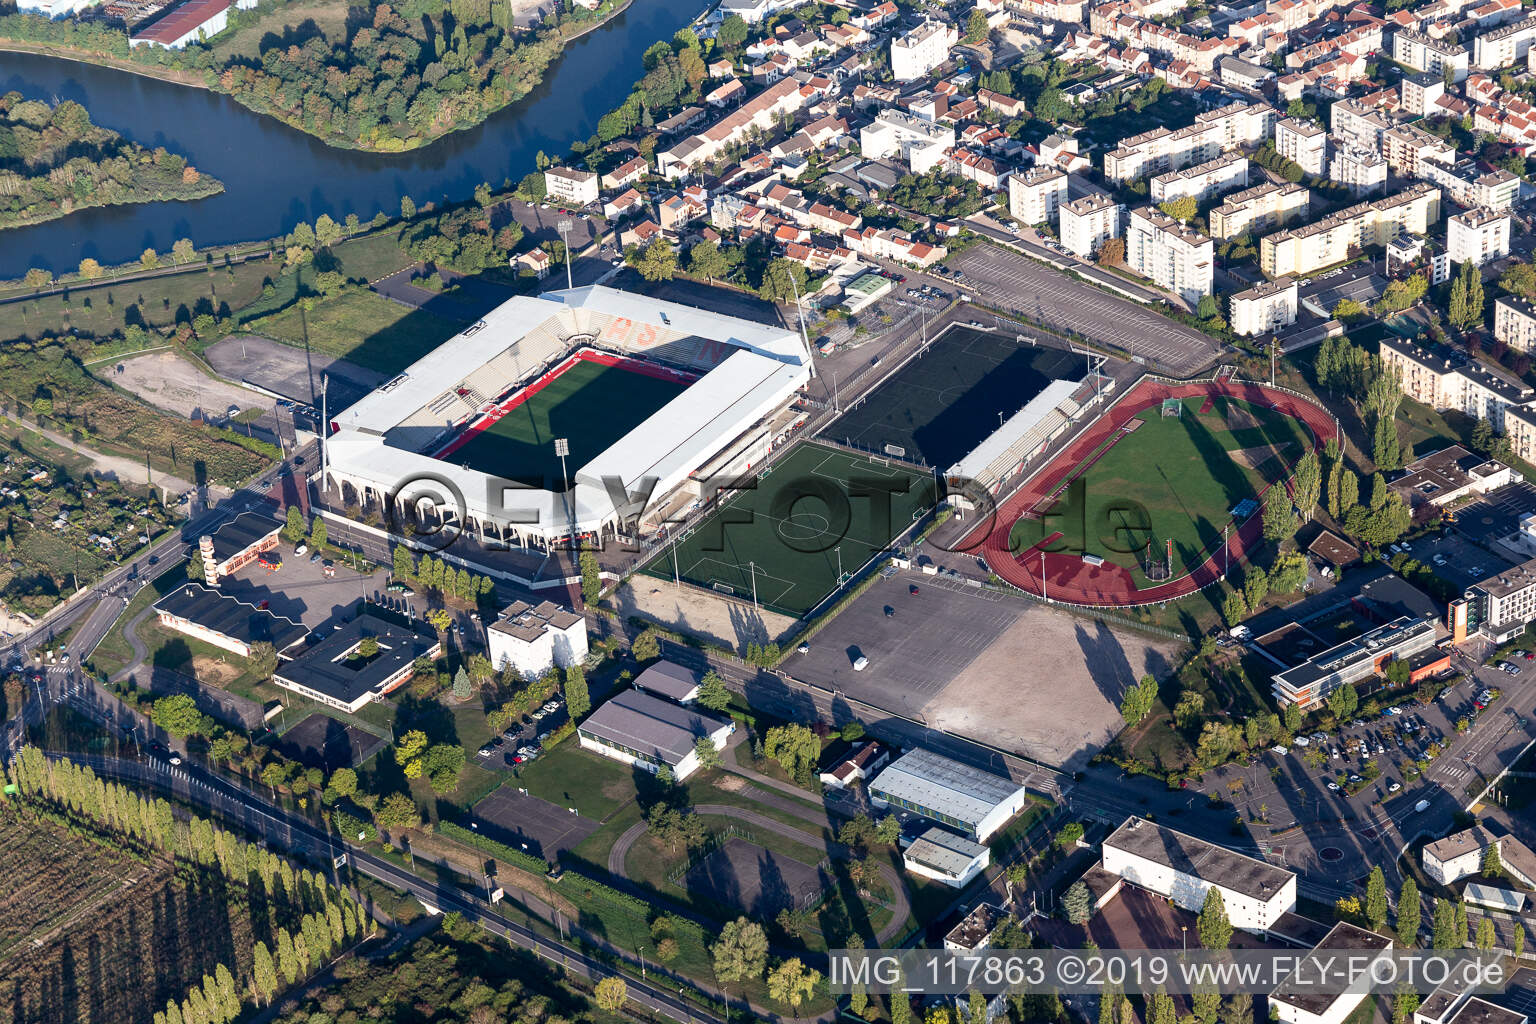 Sports facility grounds of the Arena stadium Stade Marcel-Picot on Boulevard Jean JaurA?s in Tomblaine in Grand Est, France